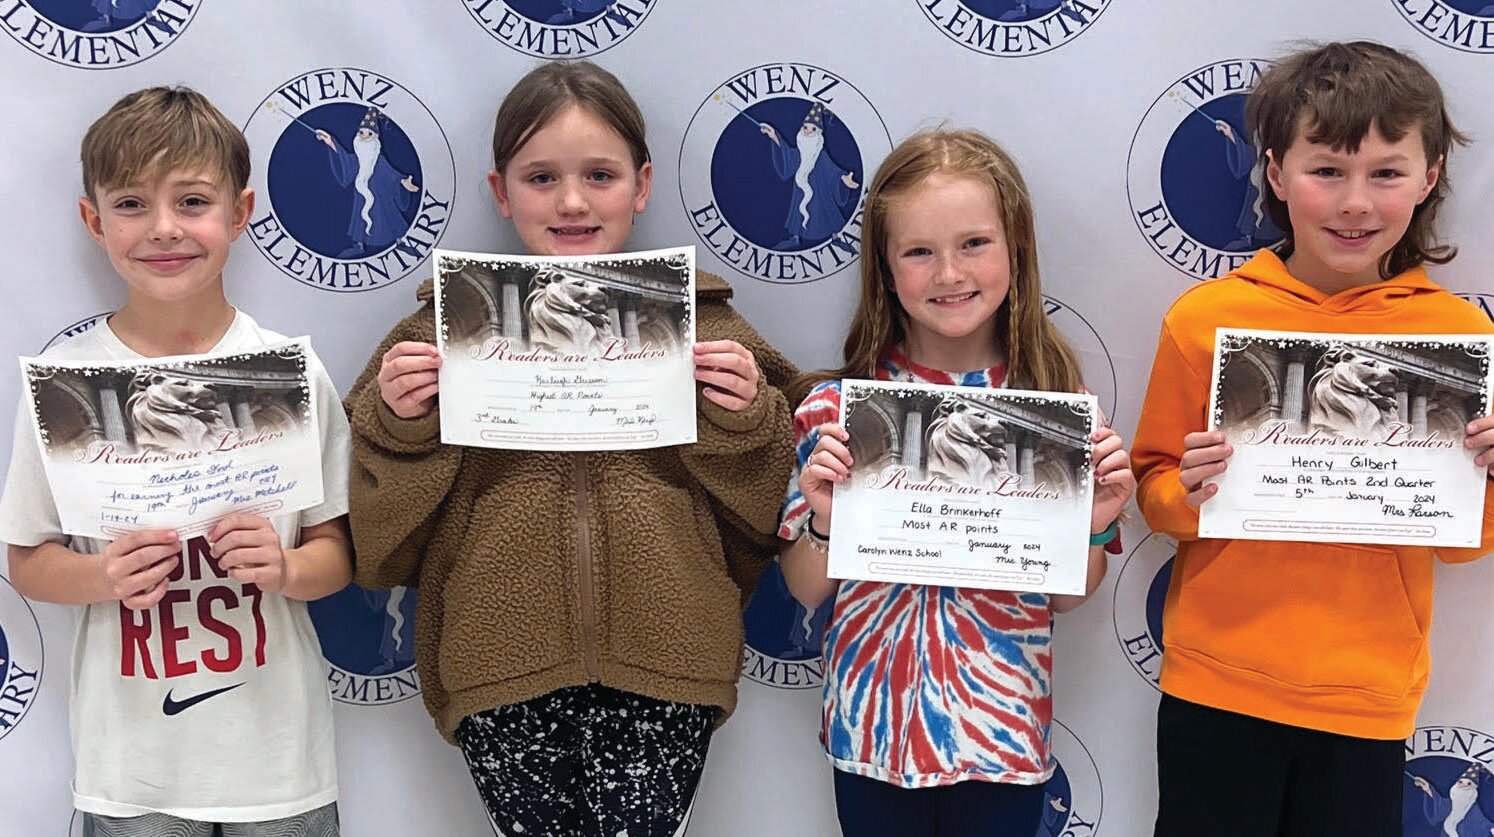 Carolyn Wenz students in fourth grade were recognized with awards for top AR points during the school’s second quarter. Students standing left to right are, Addy Craffets, Emmy Craffets, Kaydence Holloway and Emma Clark